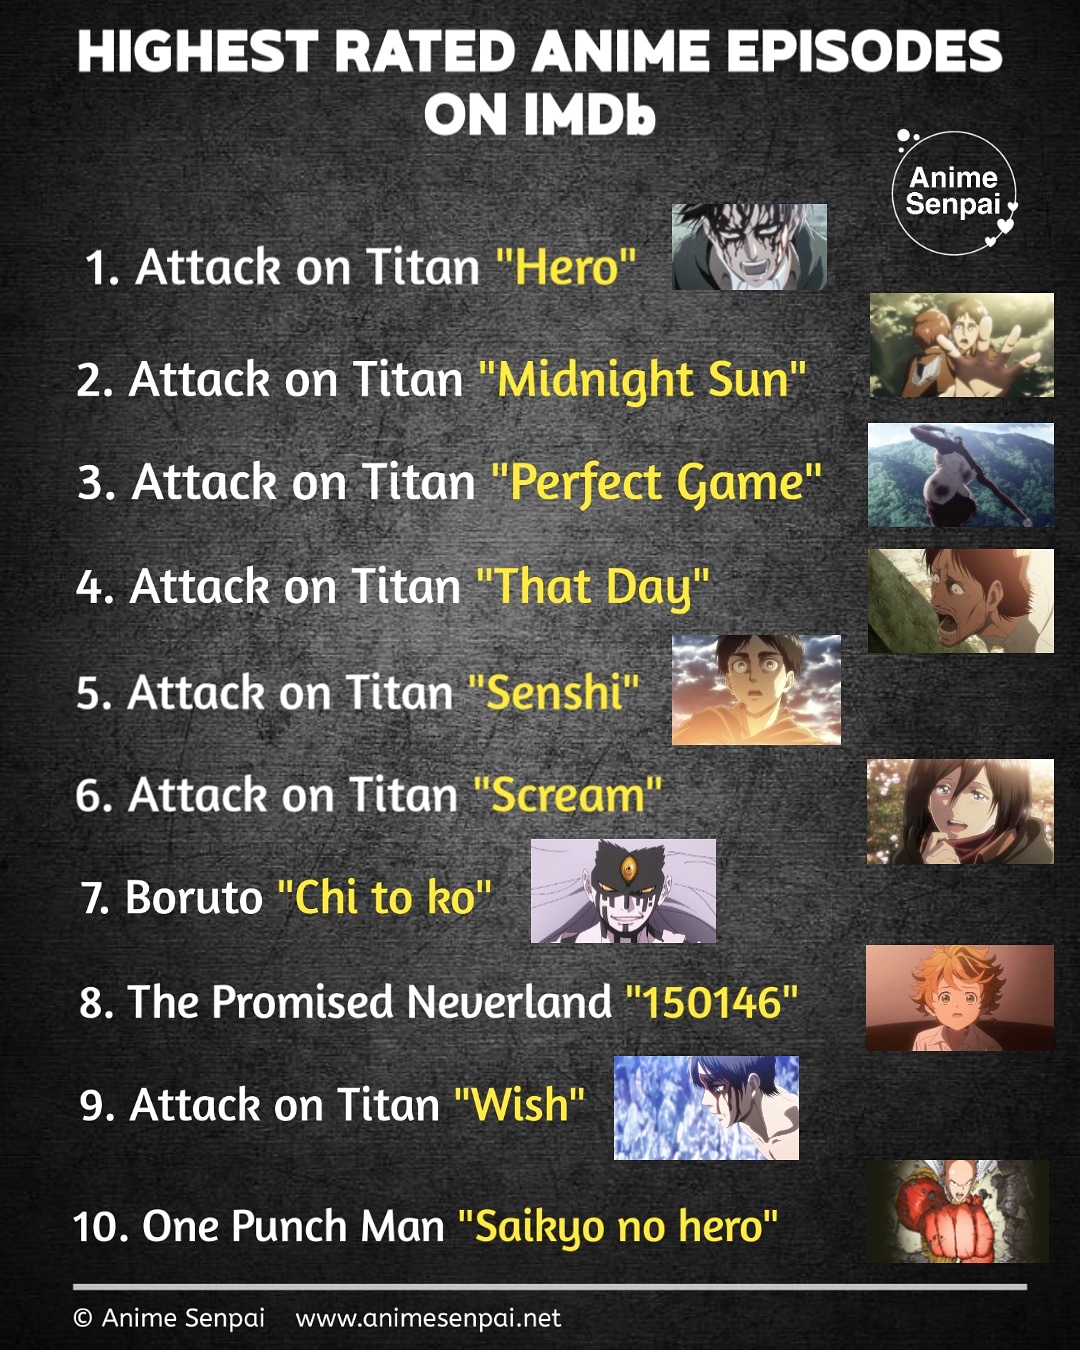 Top 10 HighestRated Anime episodes on IMDb